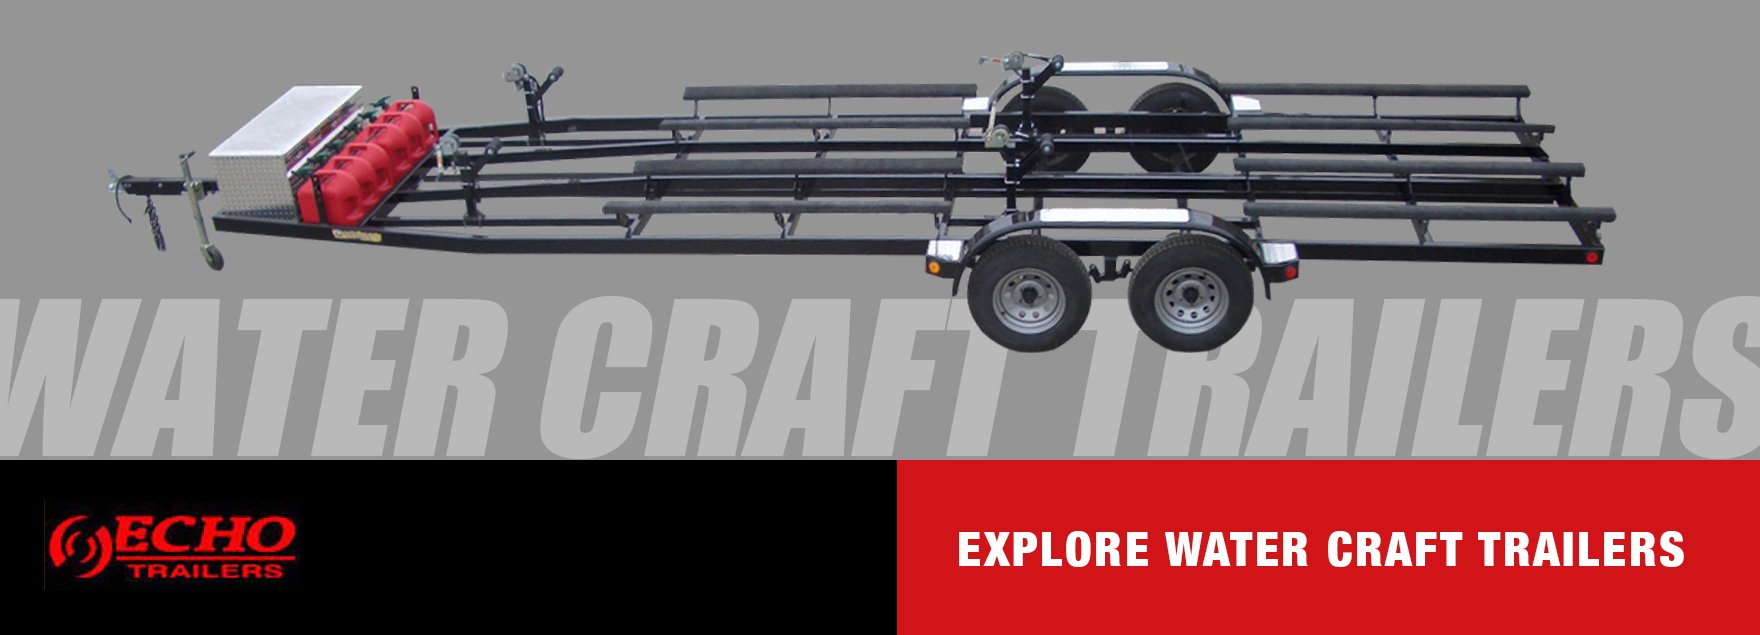 Water Craft Trailers